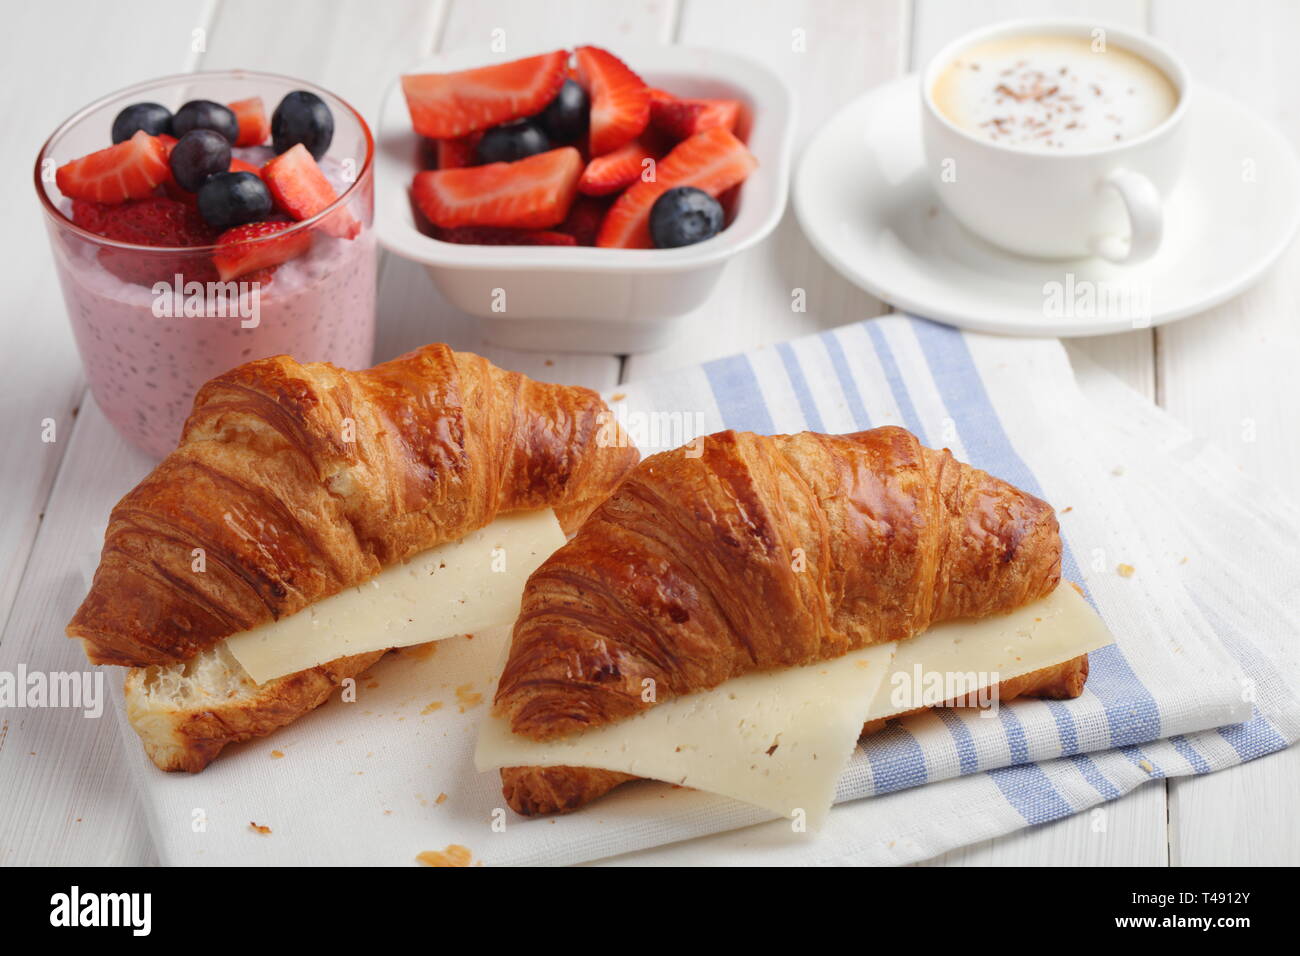 French breakfast: croissant sandwich with cheese, fruit salad, chia seeds yogurt, and a cup of cappiccino Stock Photo